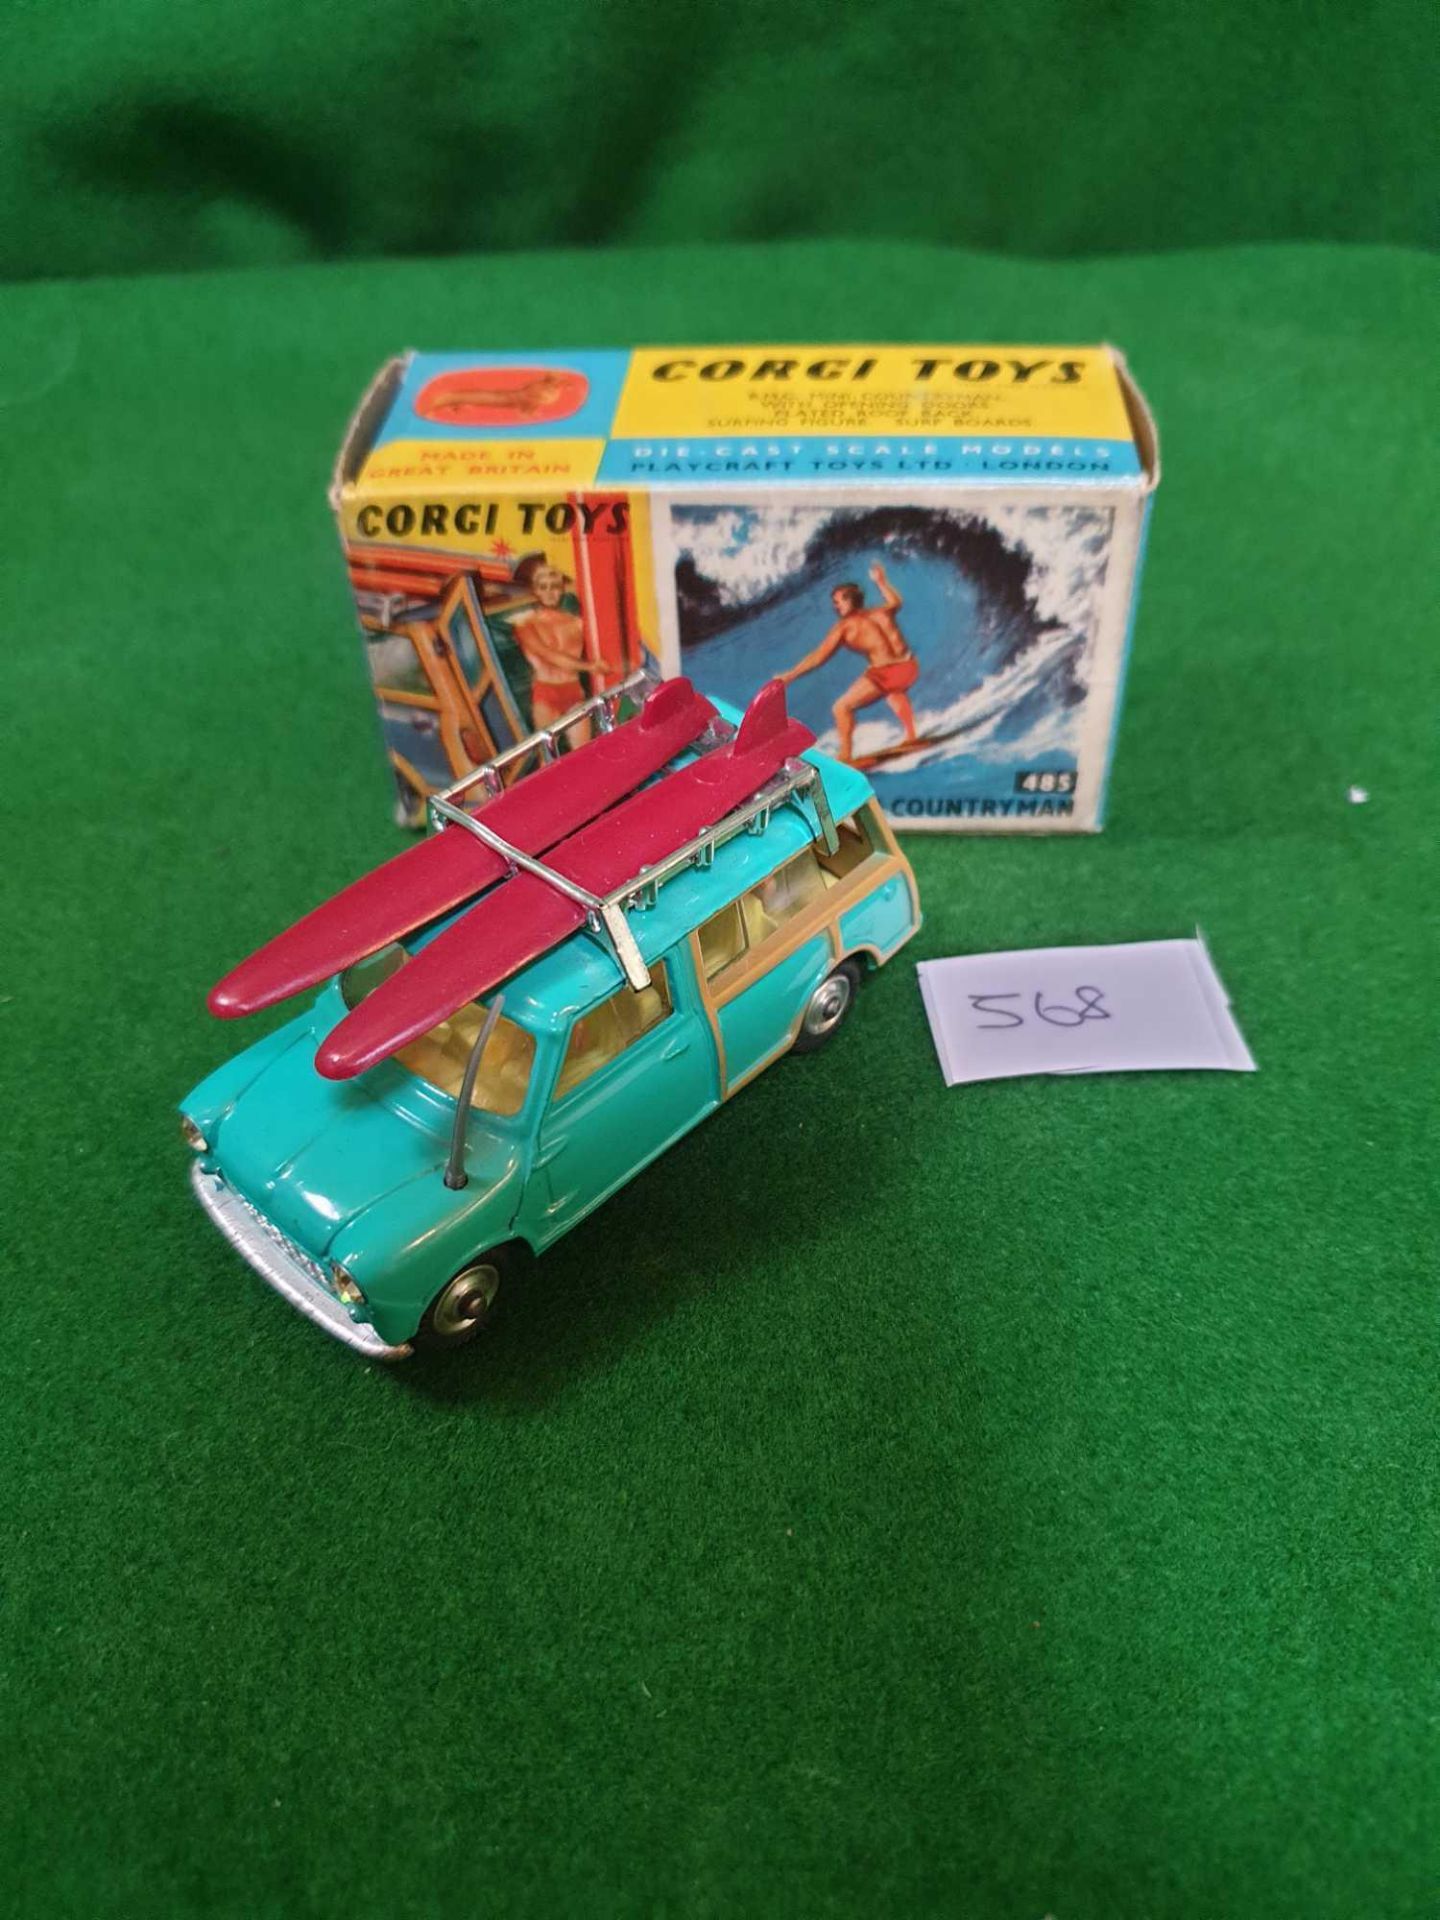 Corgi #485 Surfing With BMC Mini Countryman Comes With Surfer, Two Boards Excellent Model Mint Crisp - Image 3 of 3